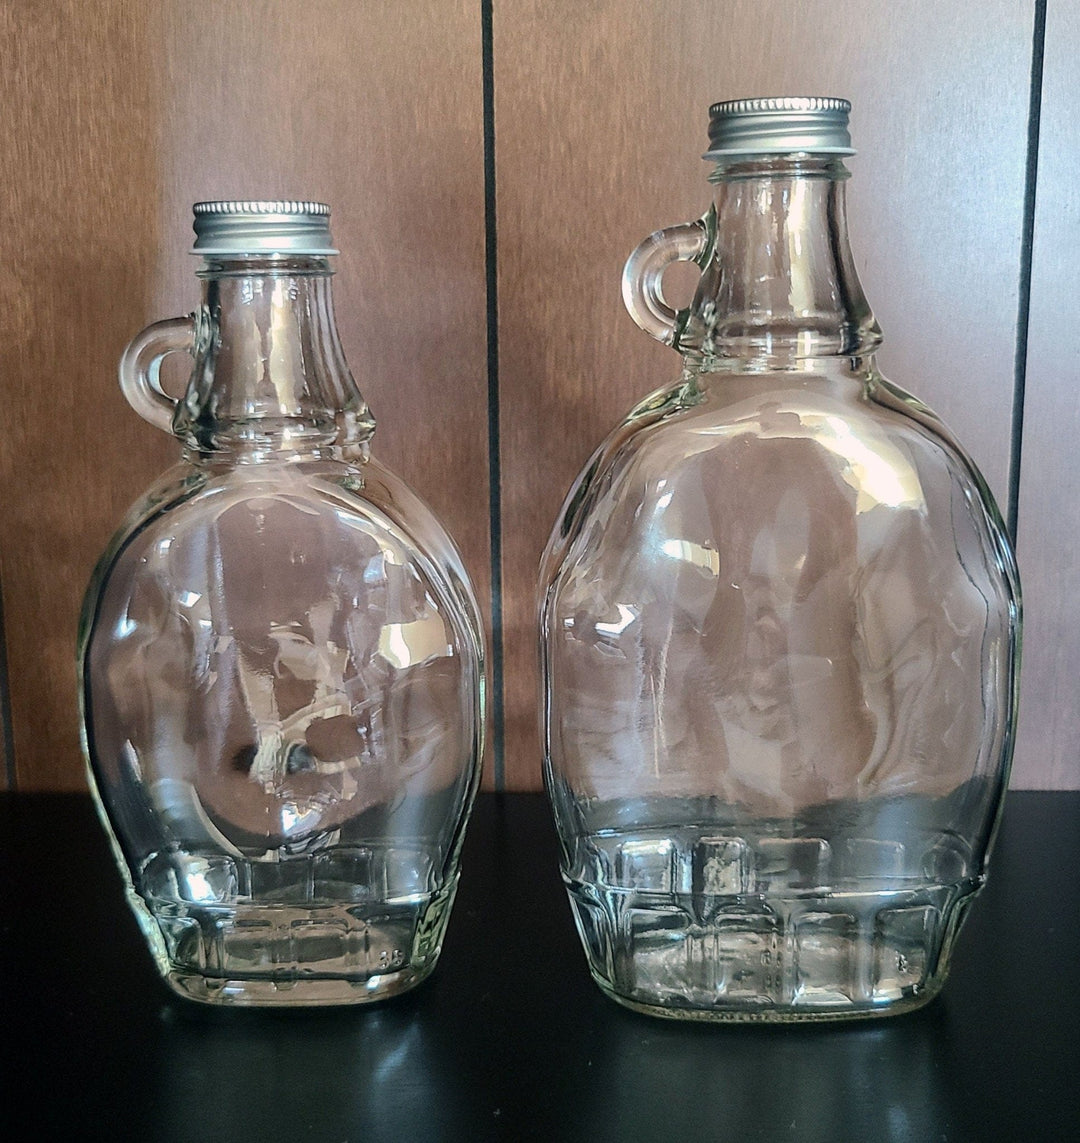 Syrup Bottle - Custom engraved 12oz glass syrup bottles with cap.